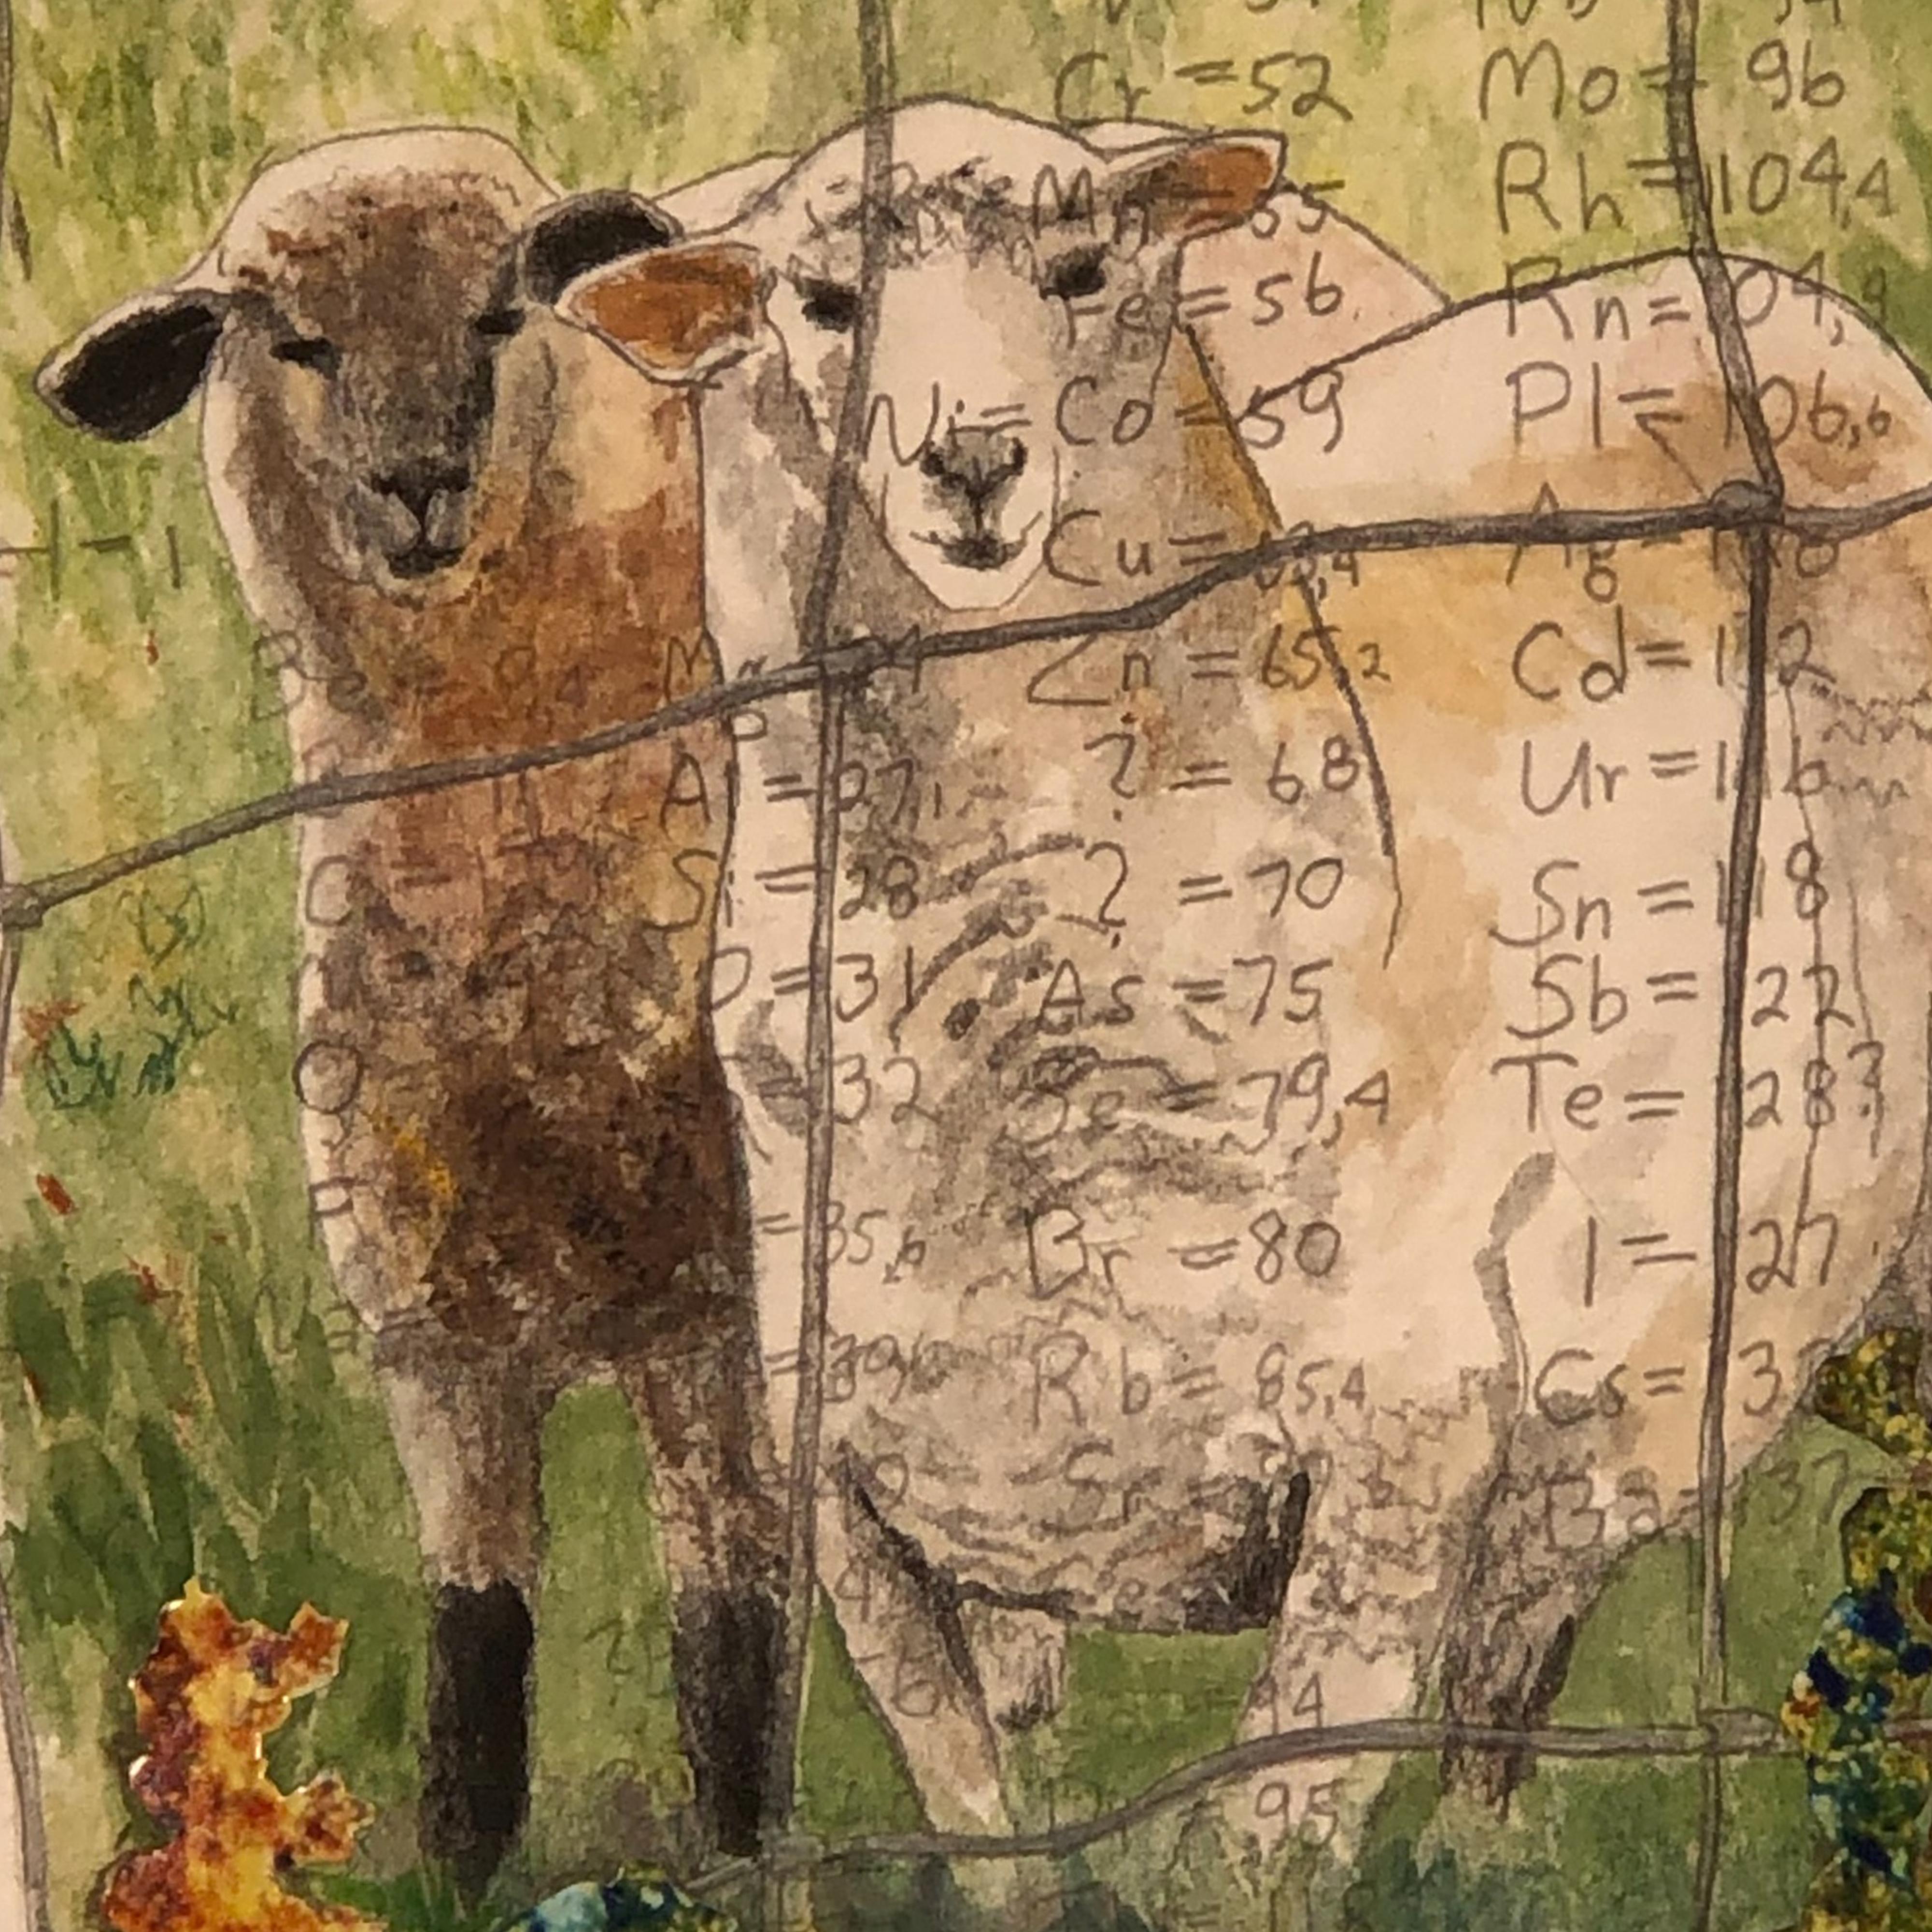 Sheep, Mendeleev’s Dream, Watercolor, Photocollage, Pencil, Ink on Layered paper - Art by Marcia Scanlon